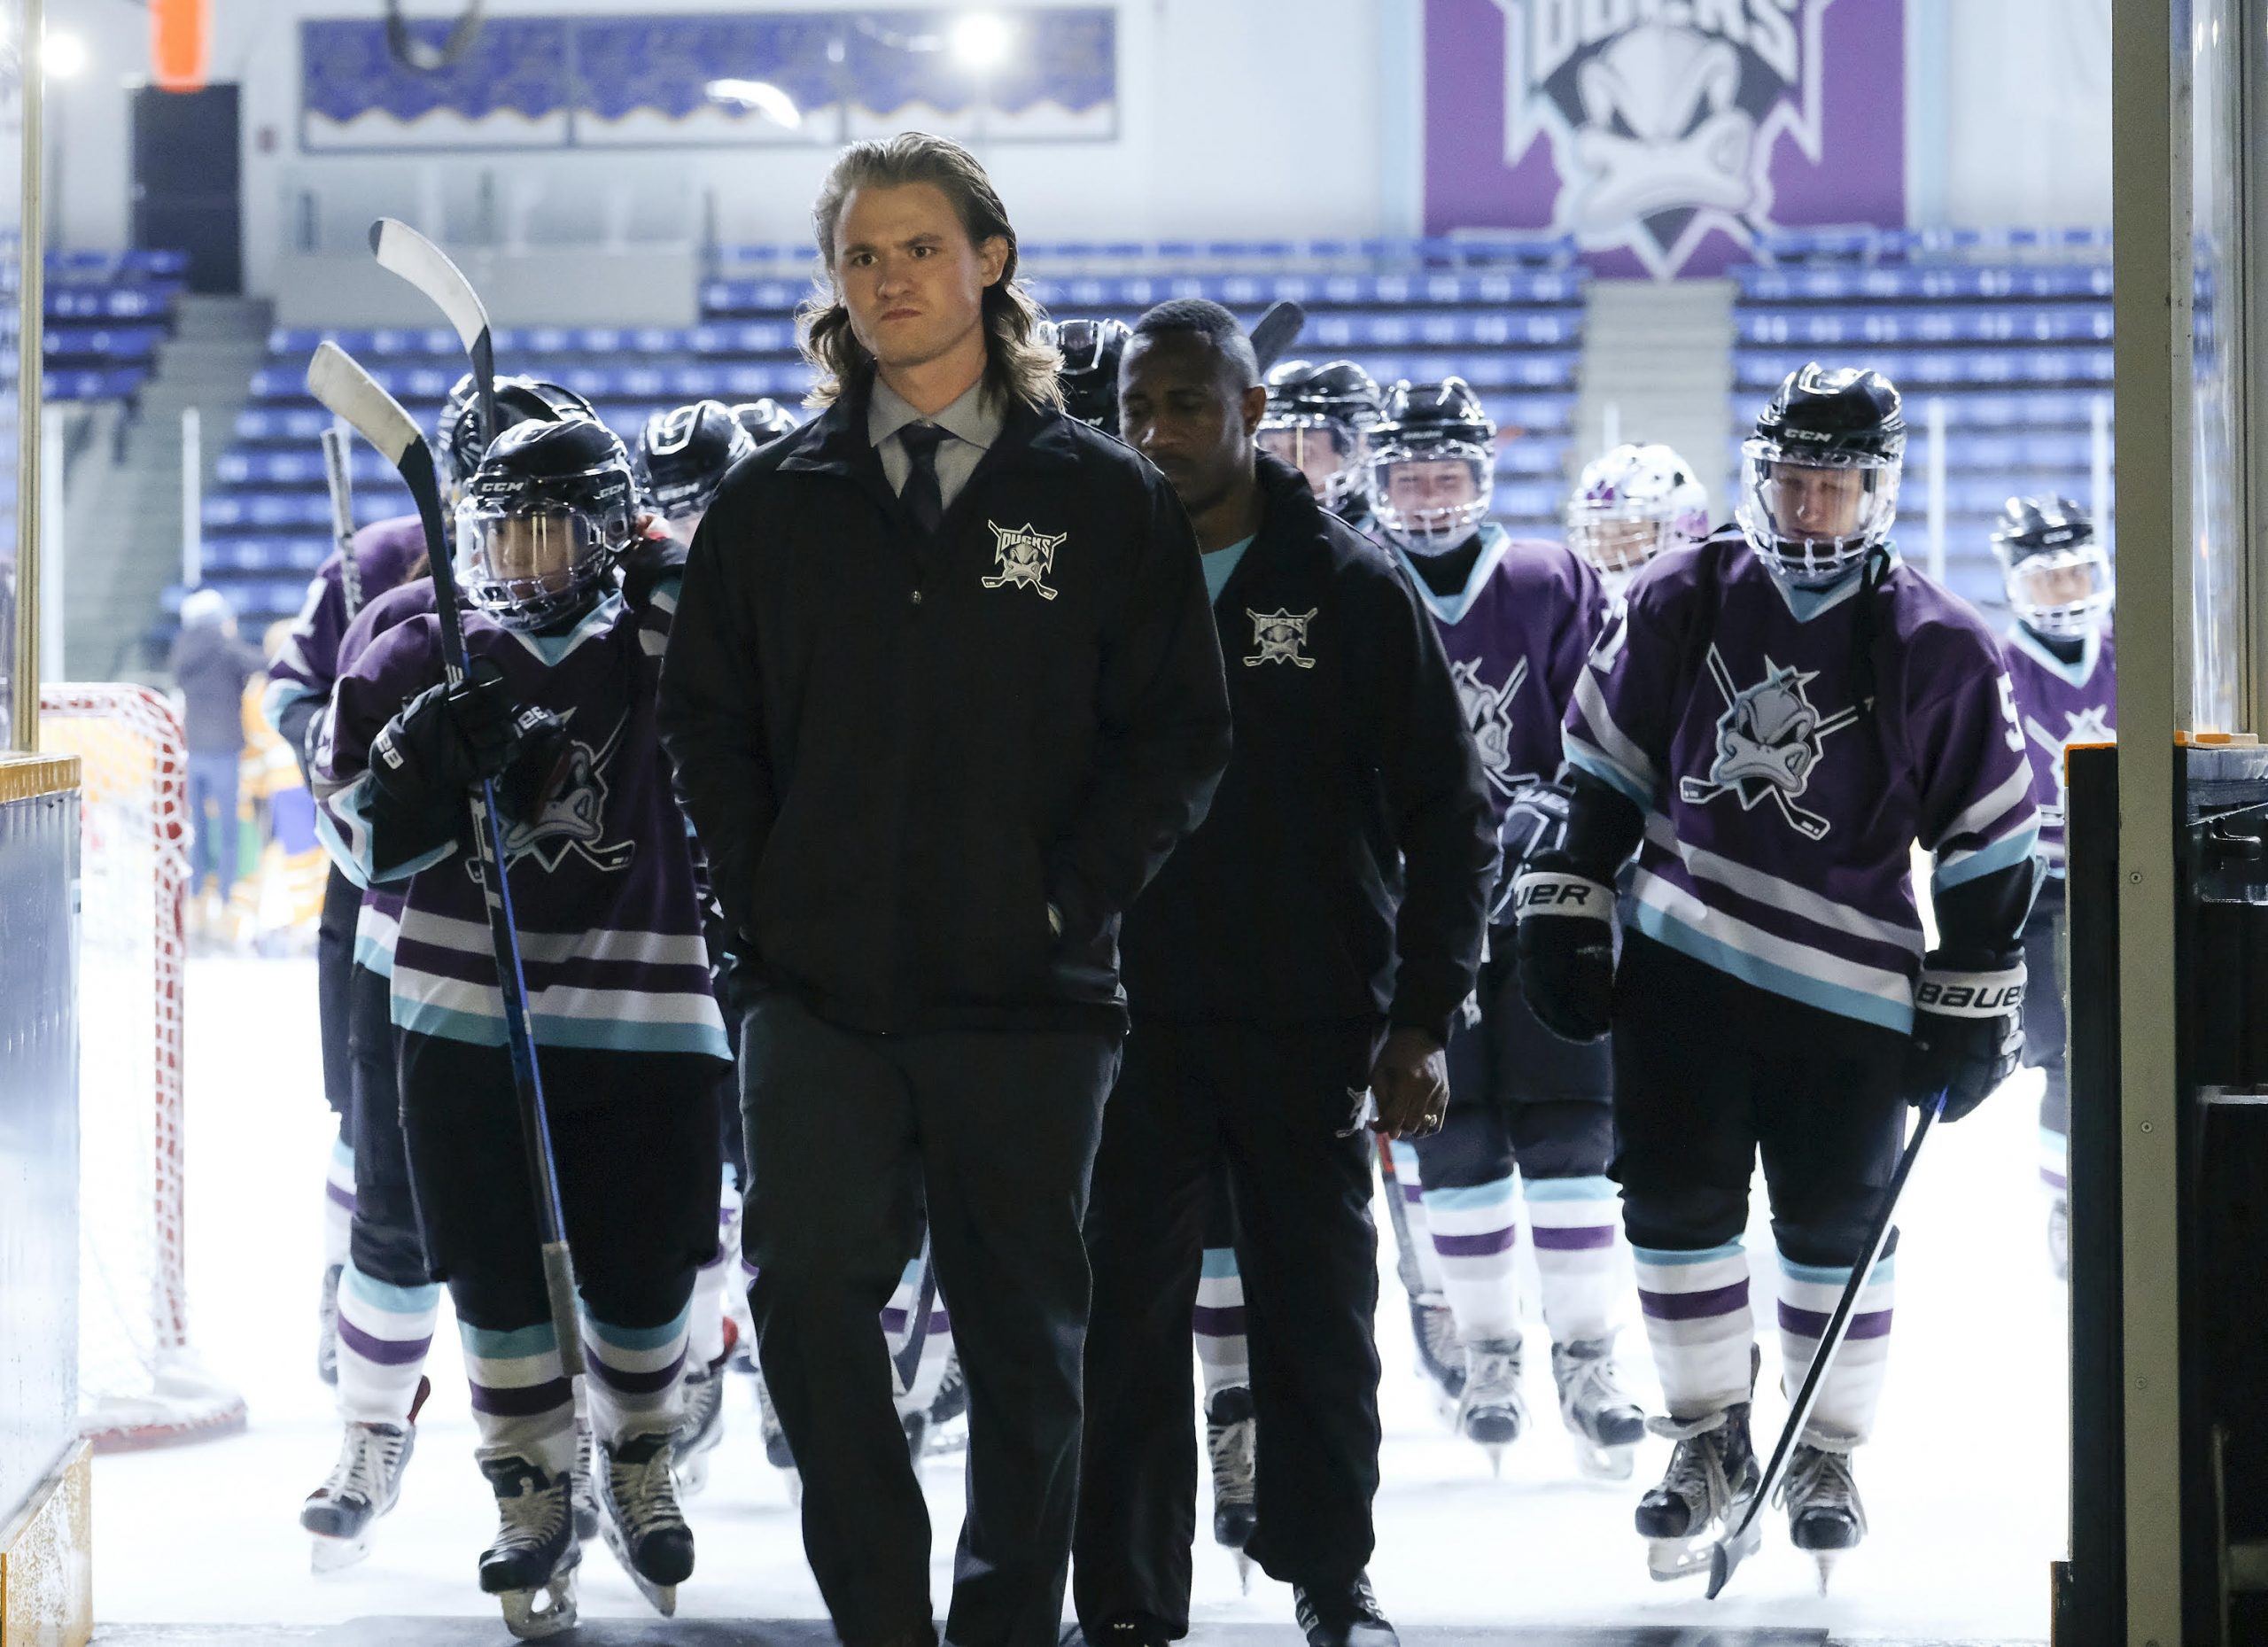 The Mighty Ducks: Game Changers, Official Trailer